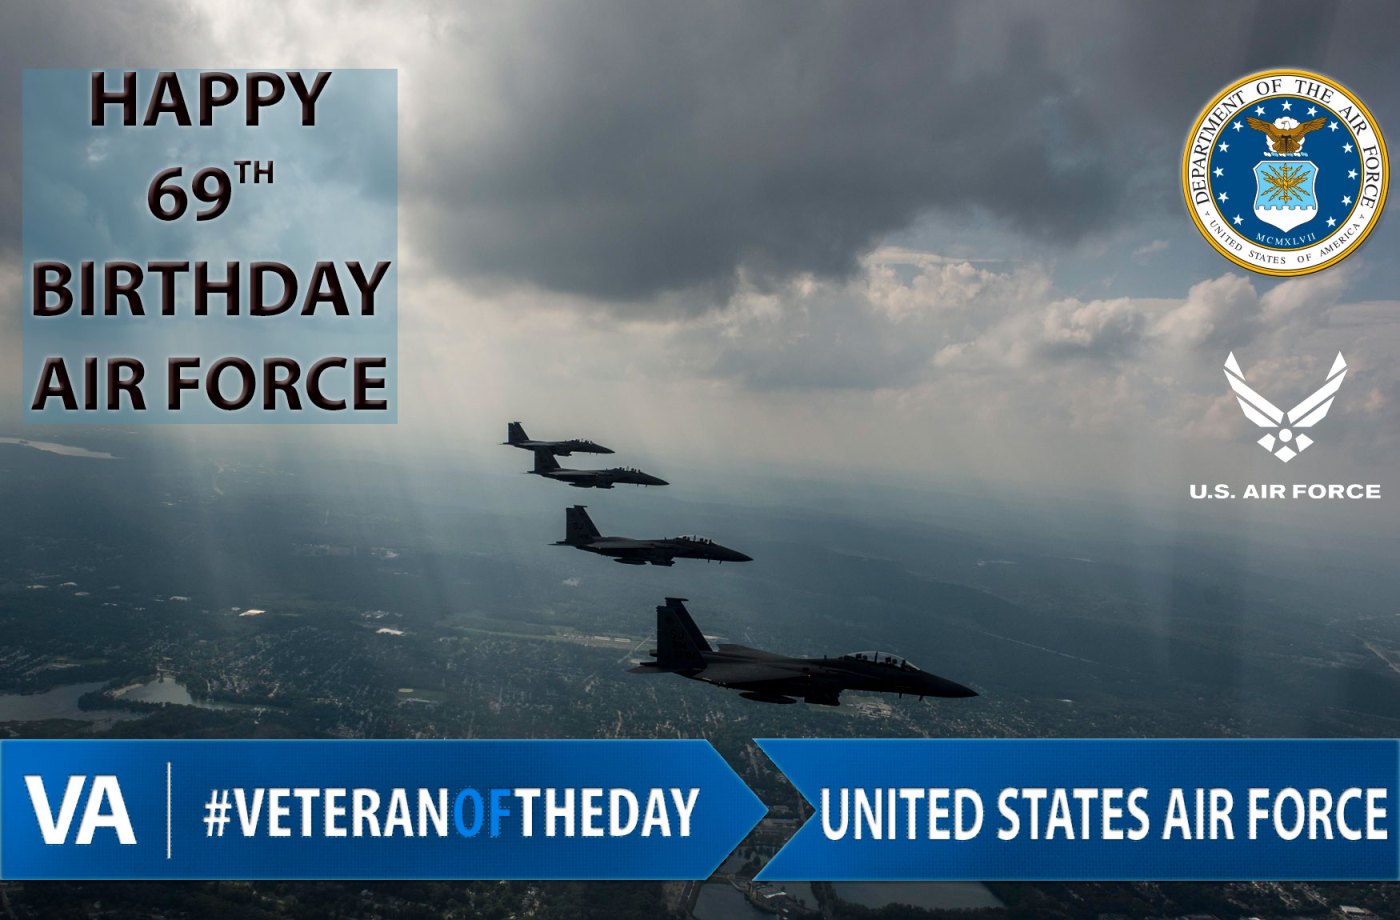 United States Air Force 69th Birthday - Veteran of the Day